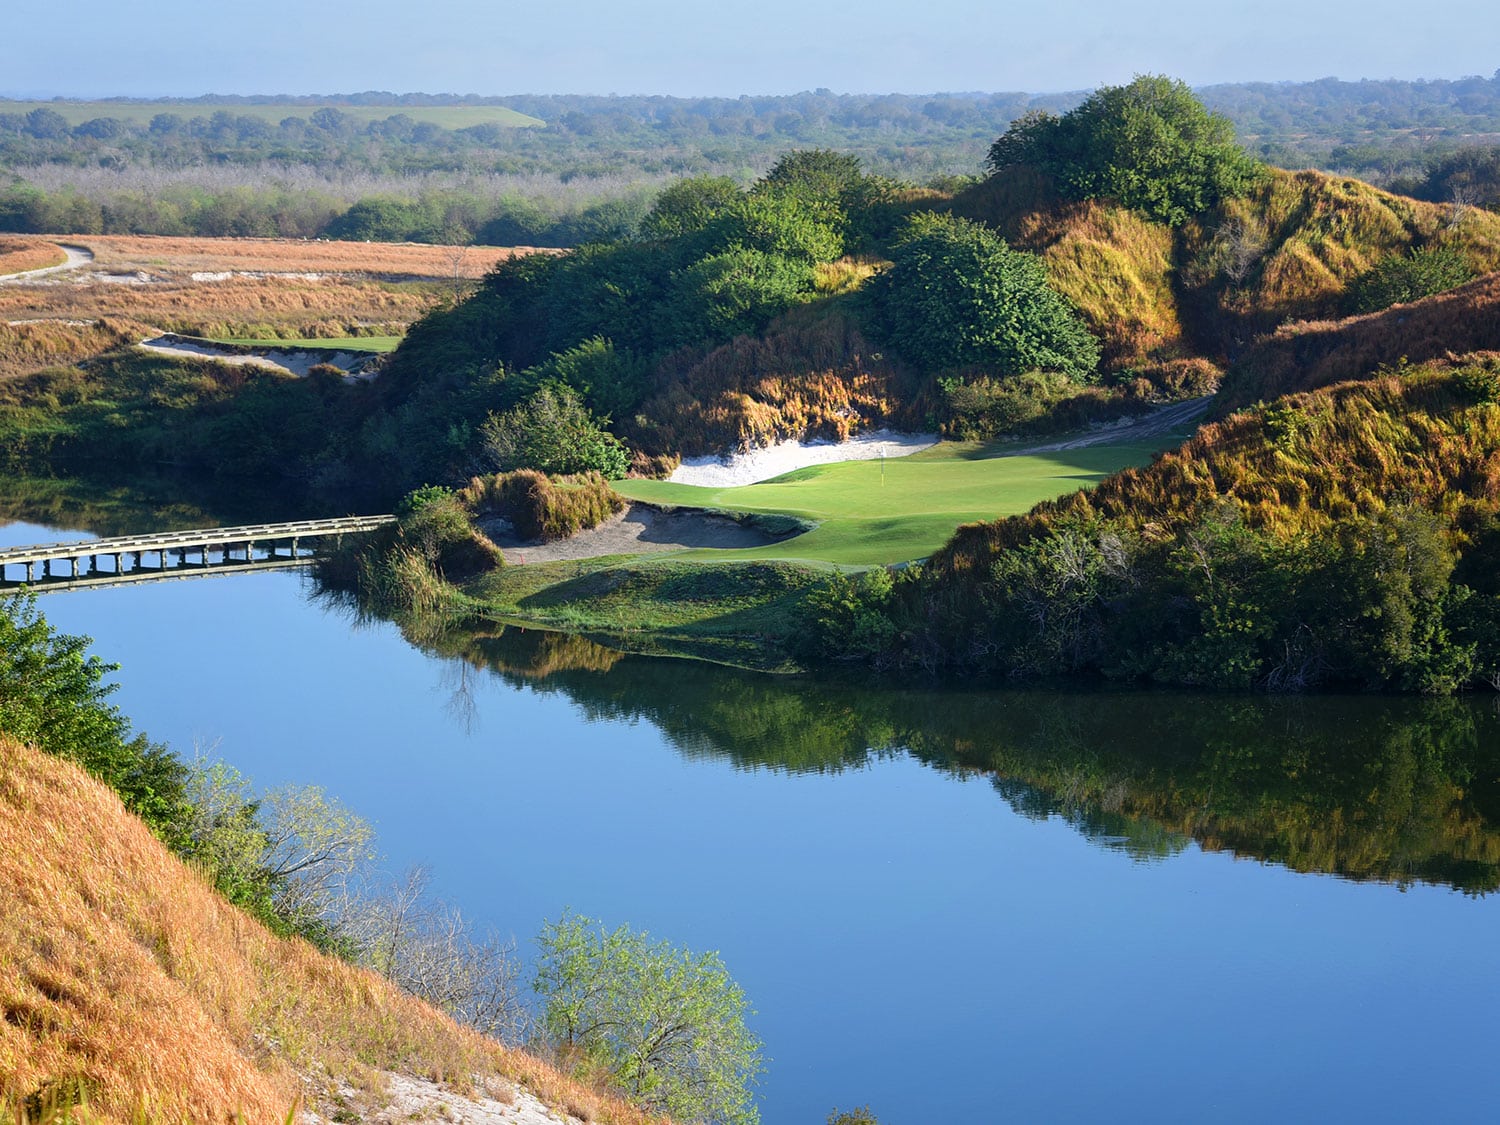 One of the incredible holes on the Streamsong Blue golf course located at the Streamsong resort in Central Florida.